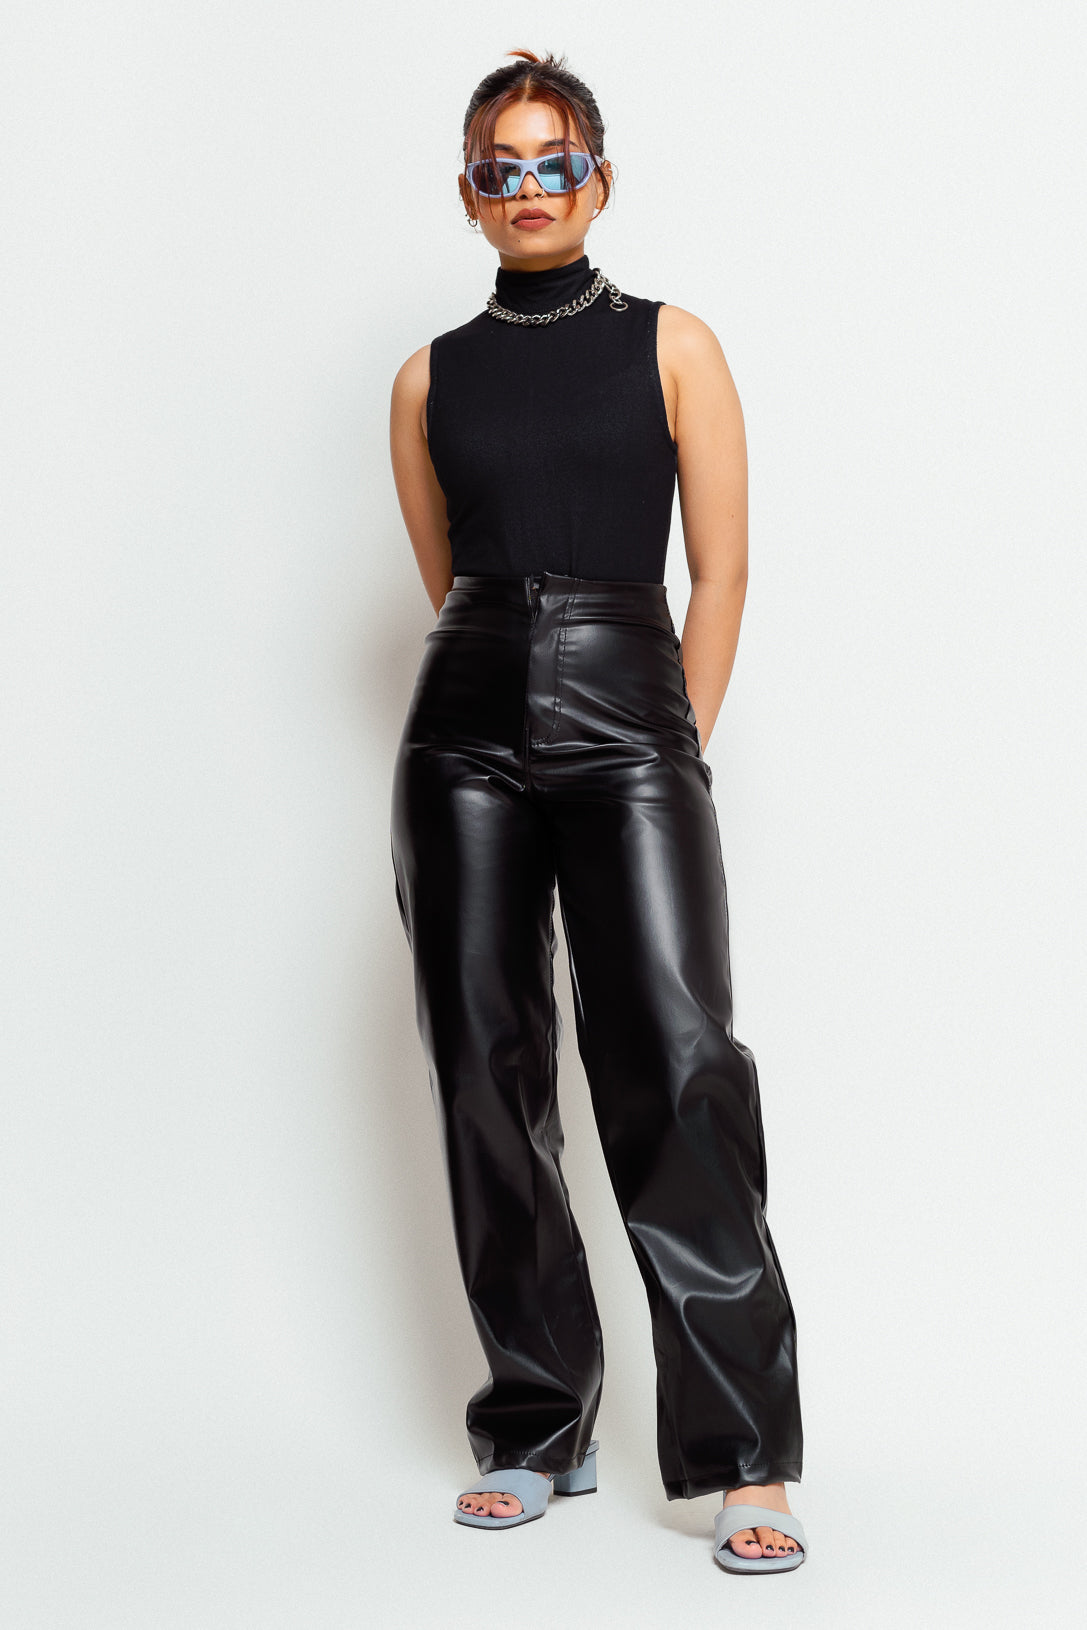 RSVP by Nykaa Fashion My Favourite Ootd Leather Pants Buy RSVP by Nykaa  Fashion My Favourite Ootd Leather Pants Online at Best Price in India   Nykaa